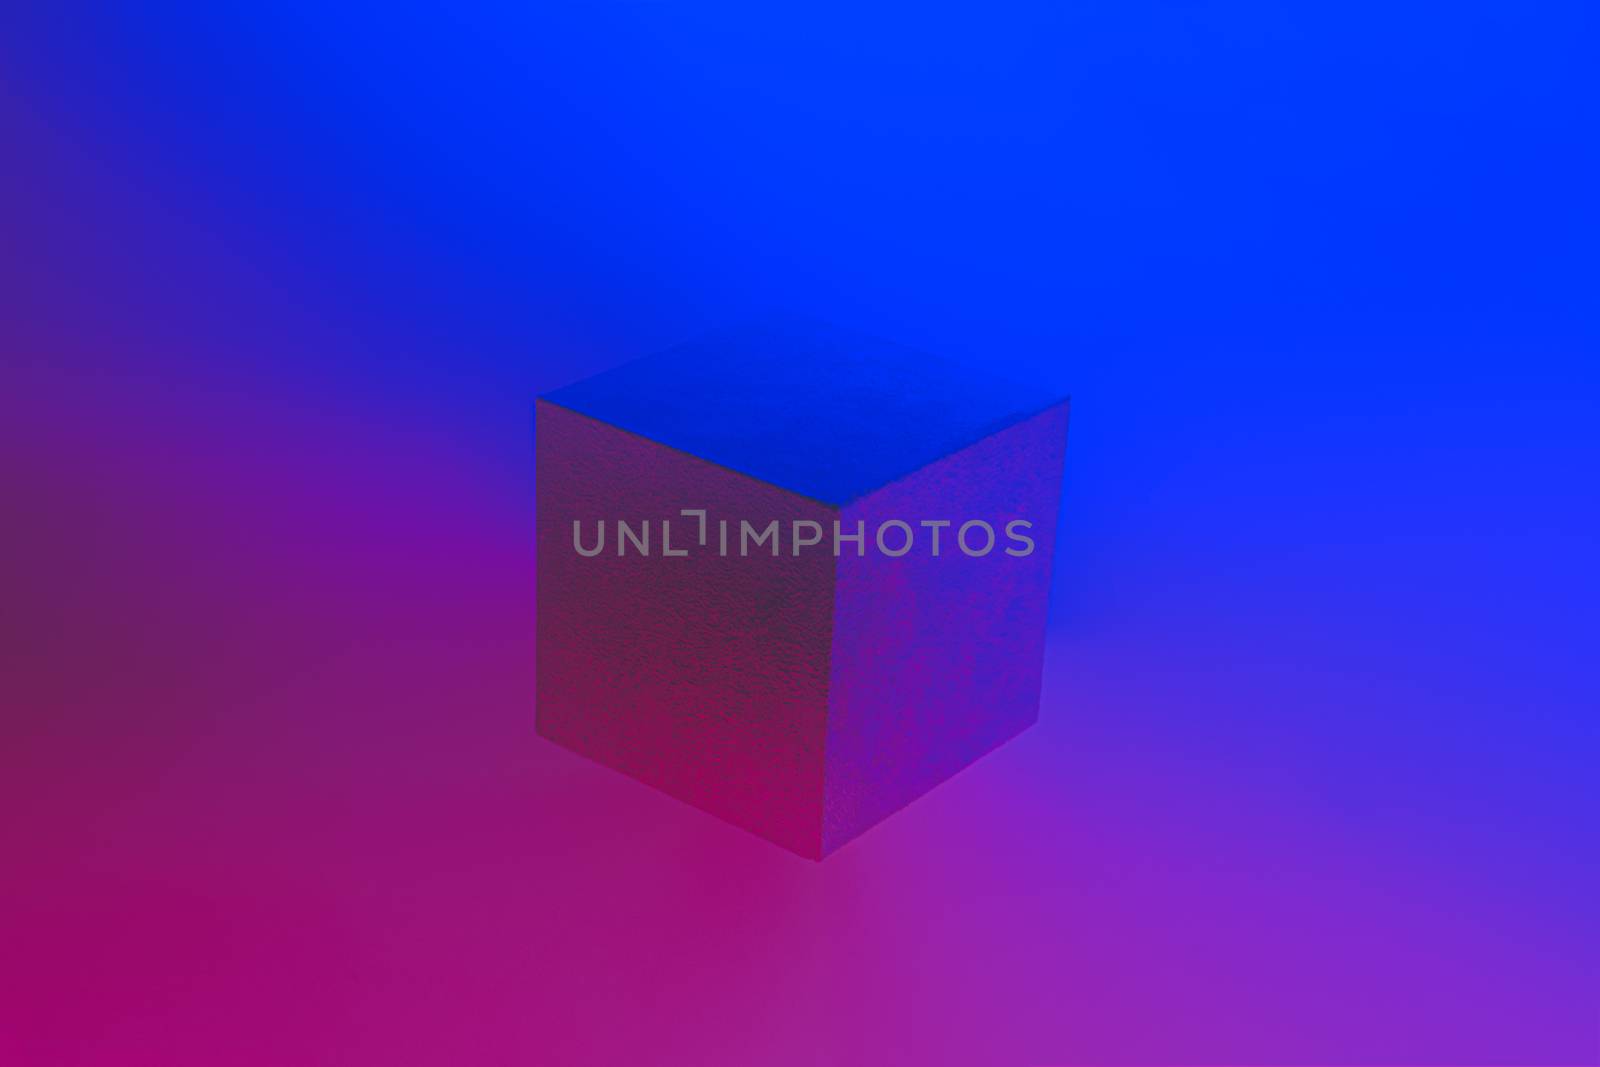 Geometric cube figure in vibrant neon colors. Faded blue and pink gradients, geometric shape, abstract concept